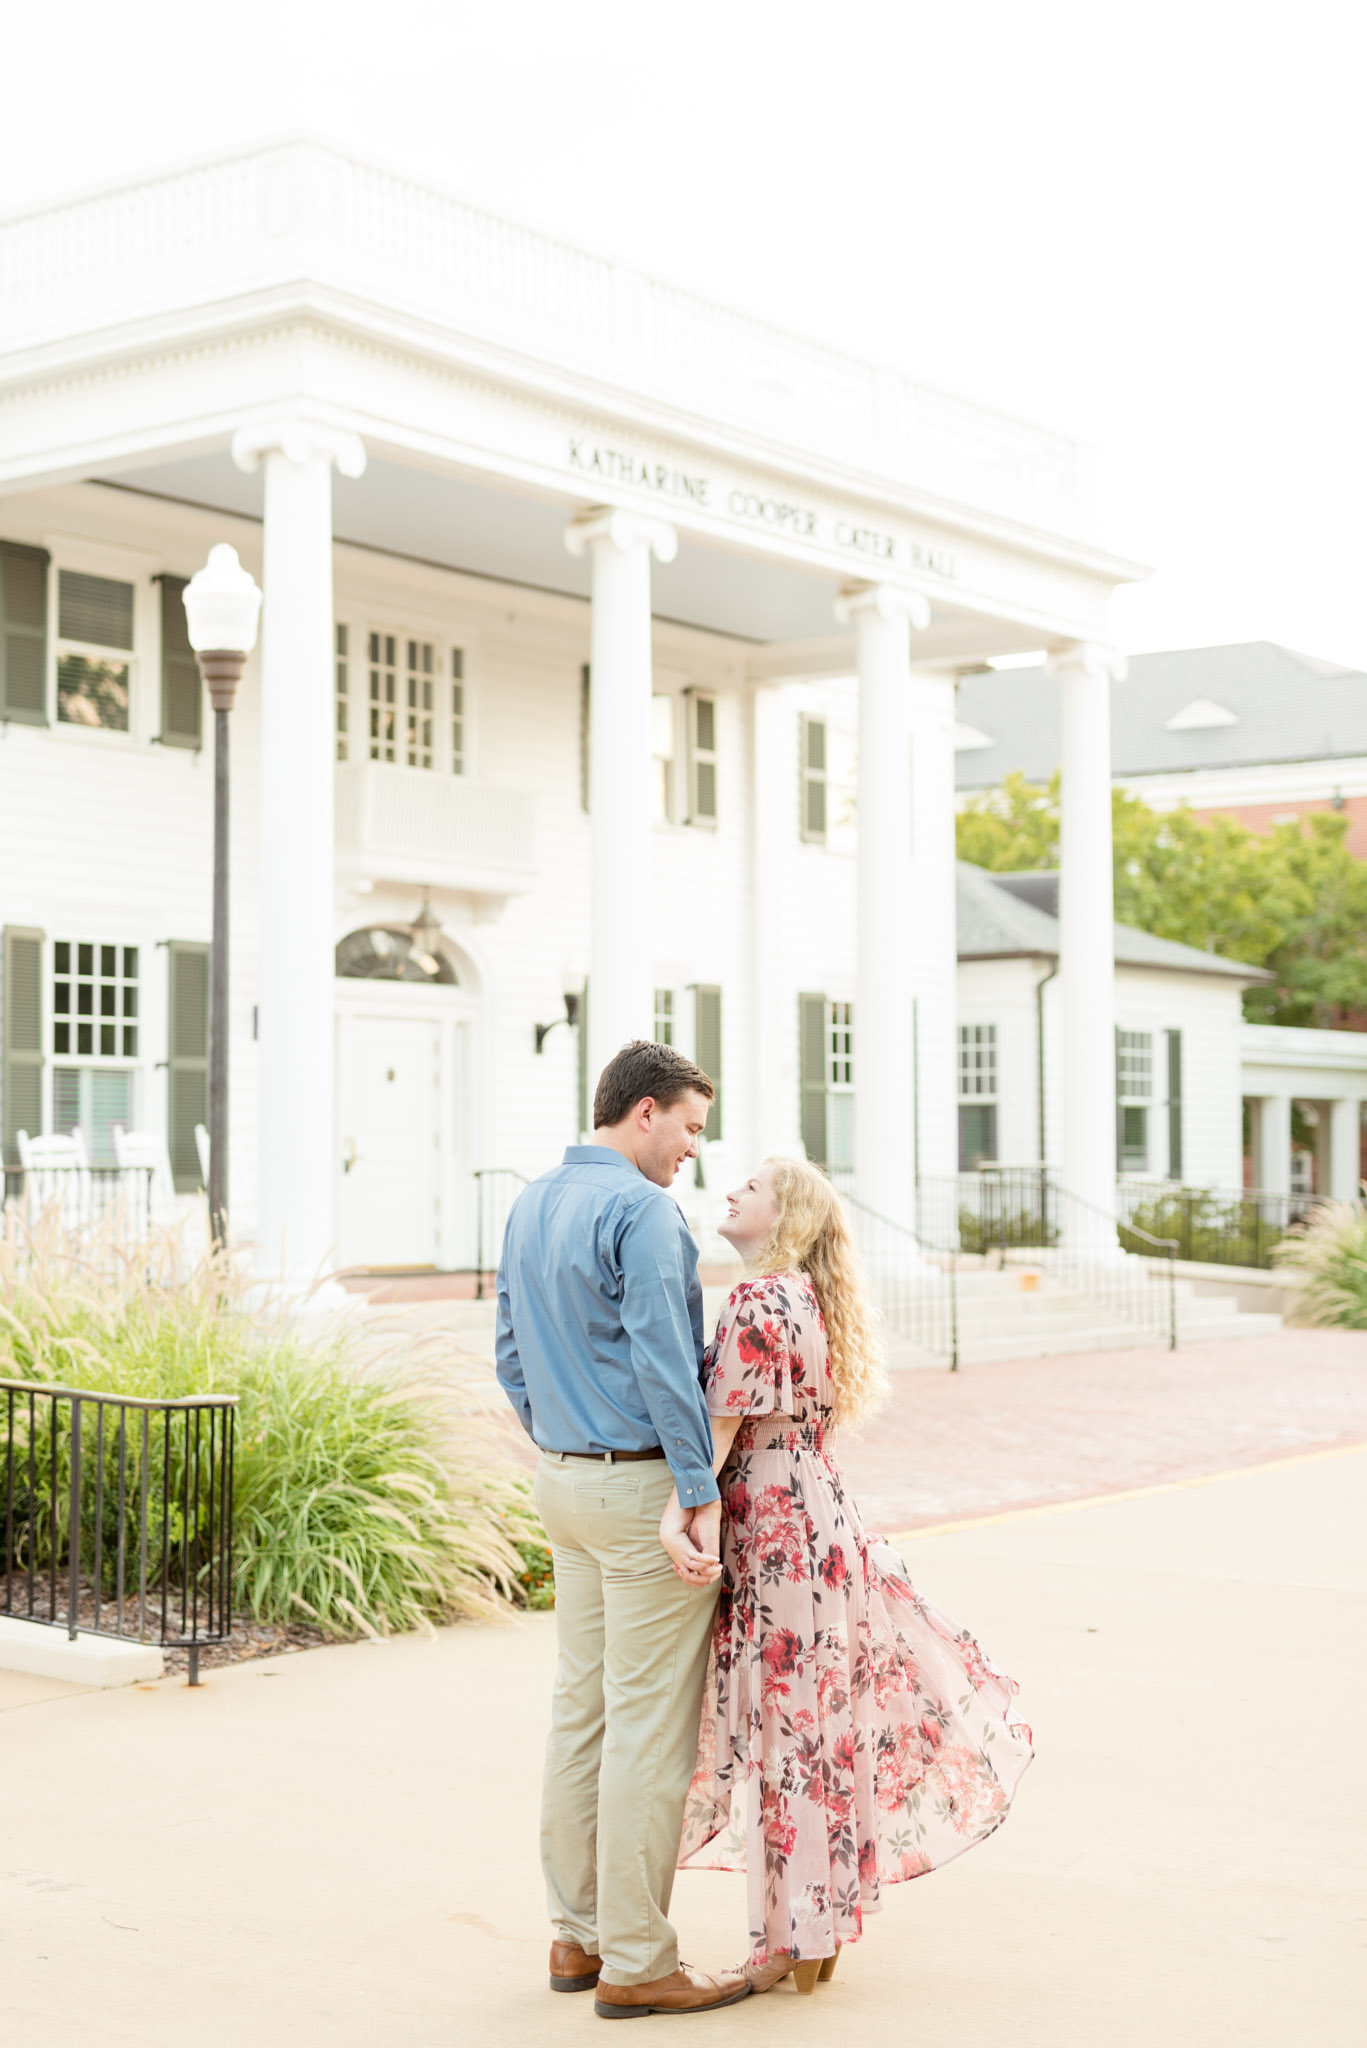 Engaged couple stands in front of white building.